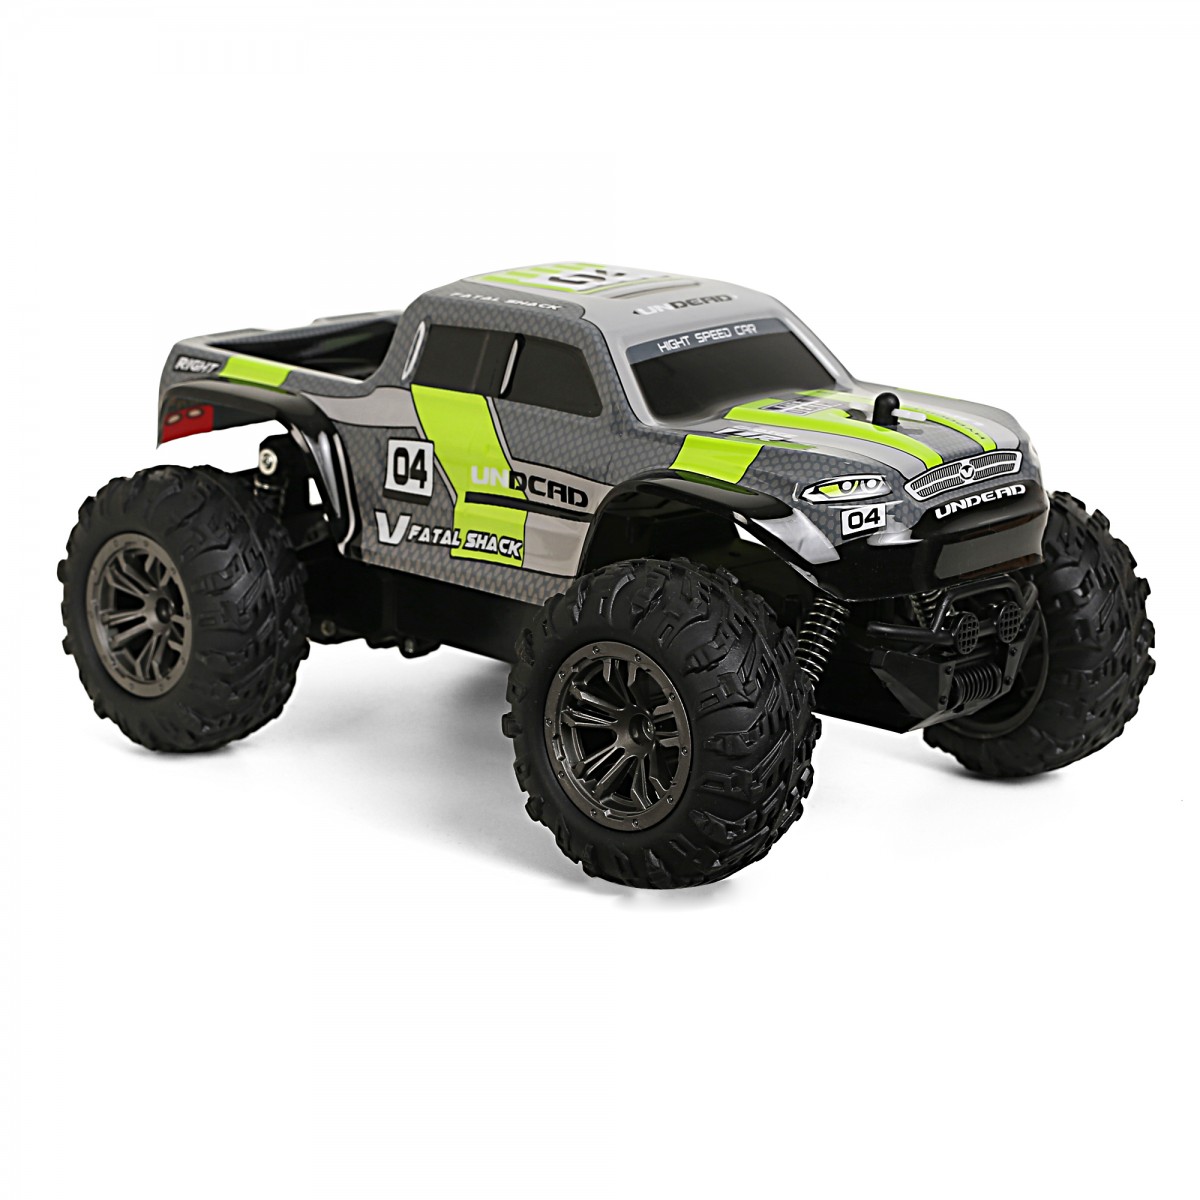 Ralleyz High Speed Undcad Off Roader Stunt Racer, RC Rock Crawler Vehicle, Scale 1:18 High Speed Remote Control Monster Off Roader, Kids for 6Y+, Grey